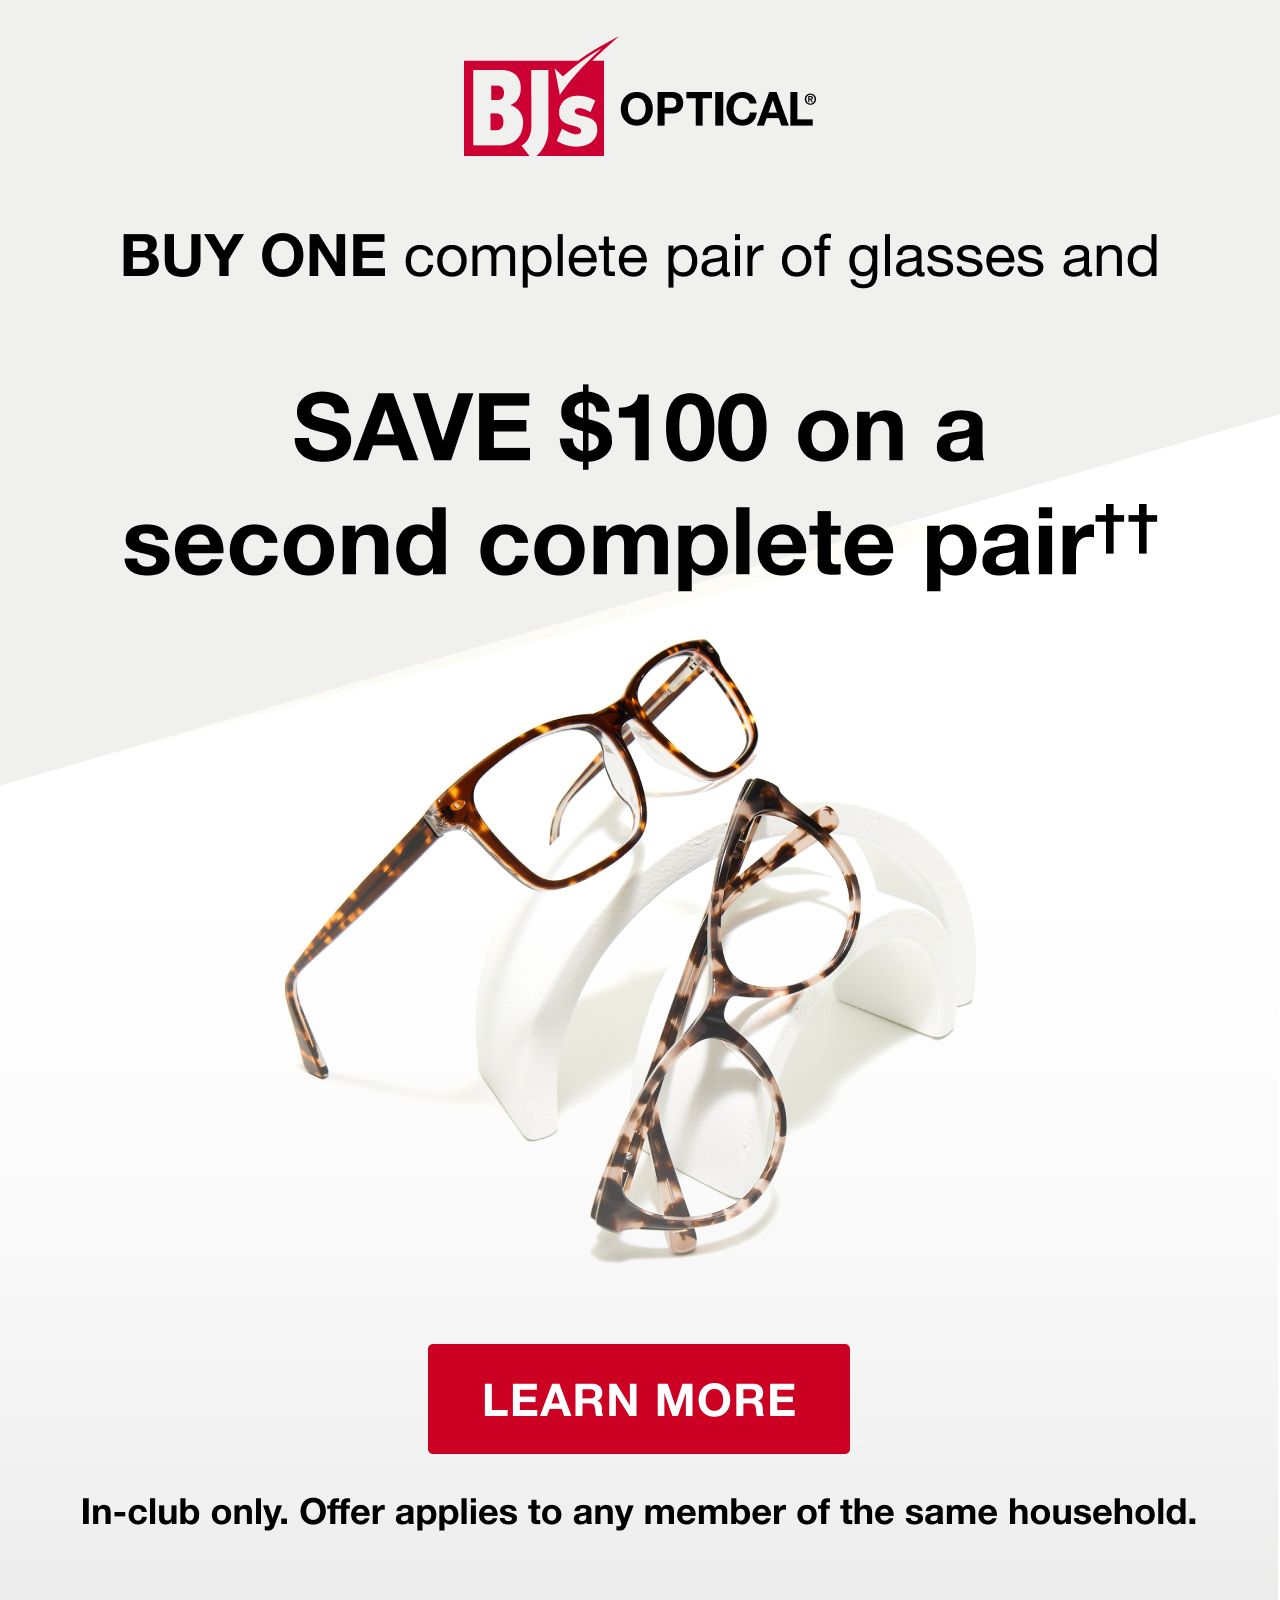 BJs Optical. Save $100 your second complete pair for any household member. Click to learn more